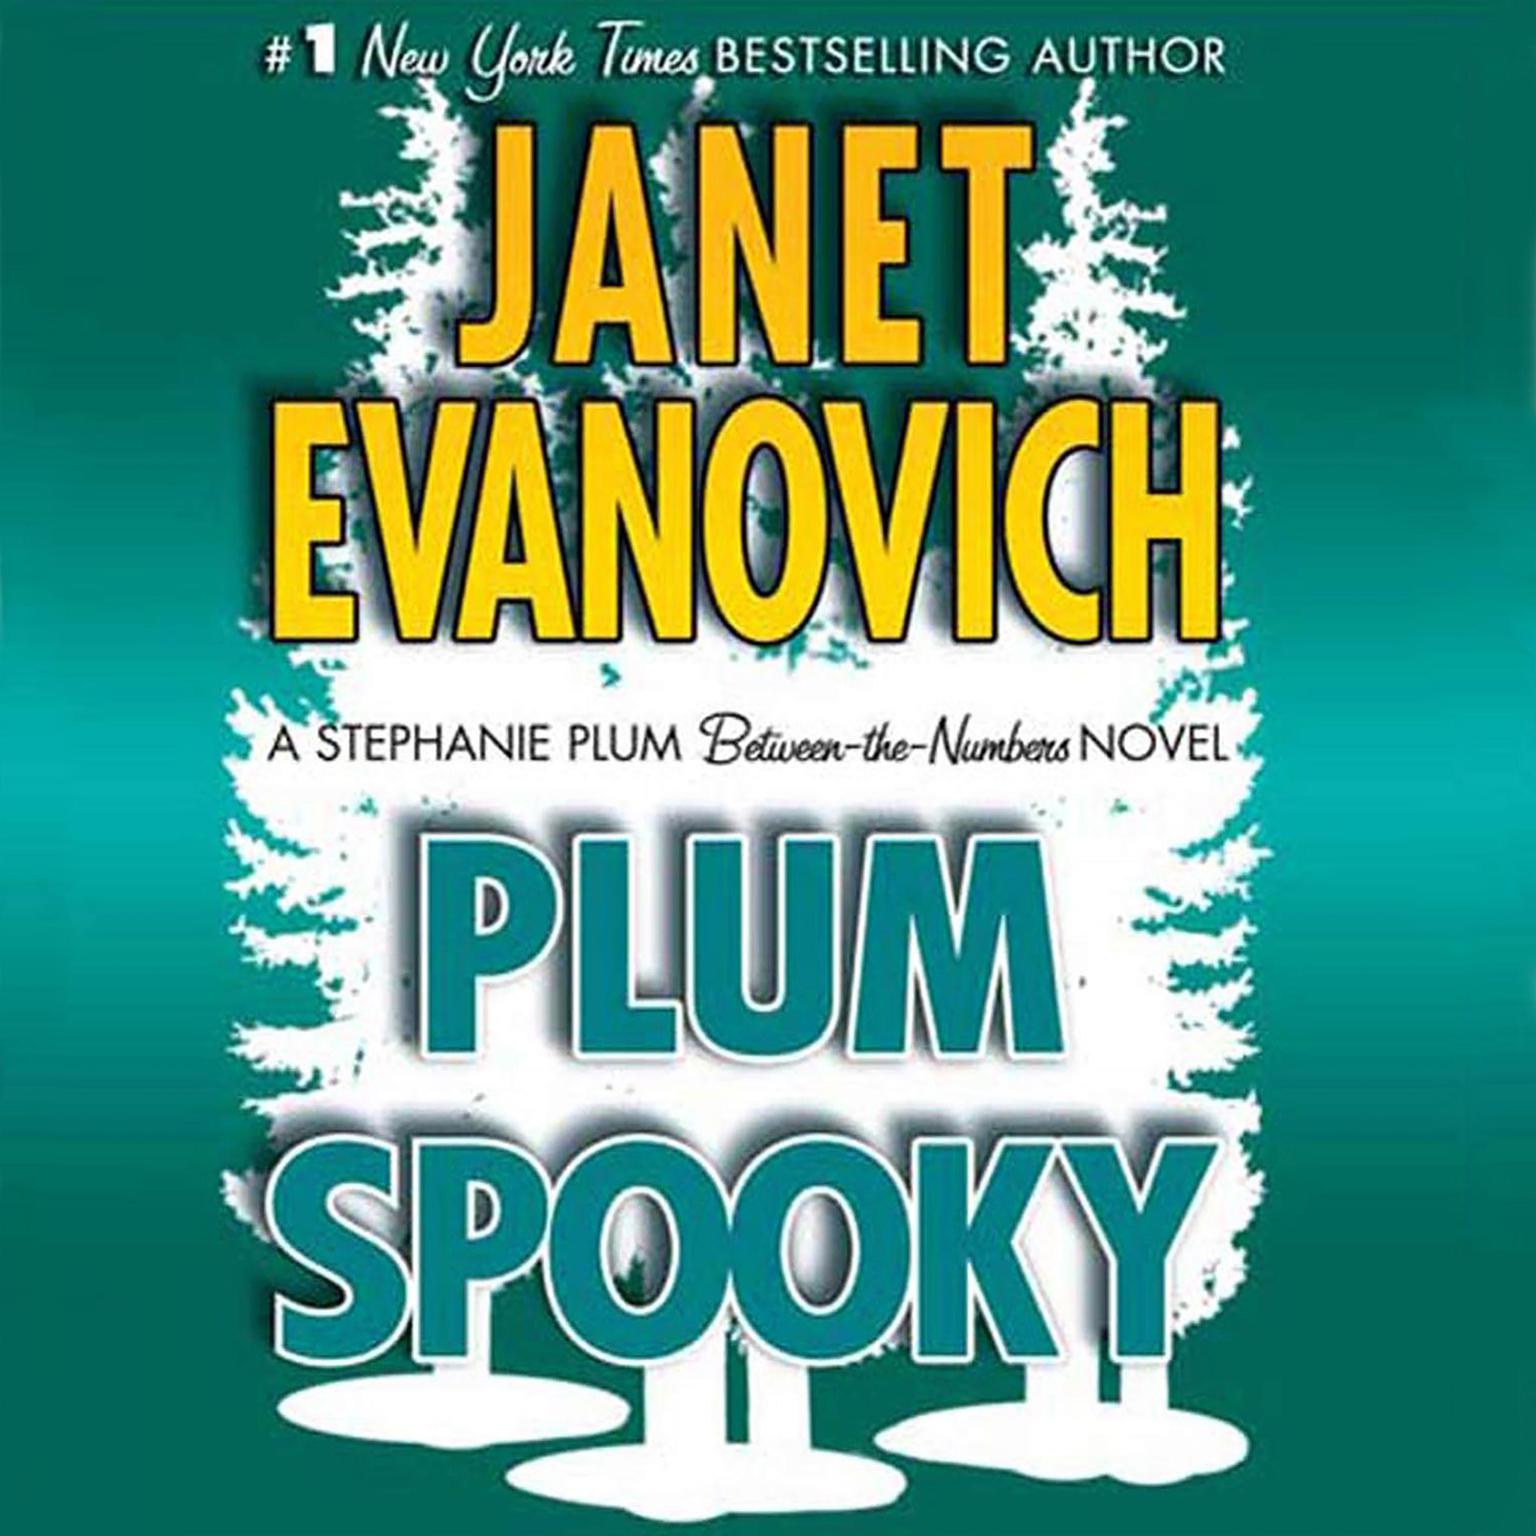 Plum Spooky (Abridged): A Stephanie Plum Between the Numbers Novel Audiobook, by Janet Evanovich